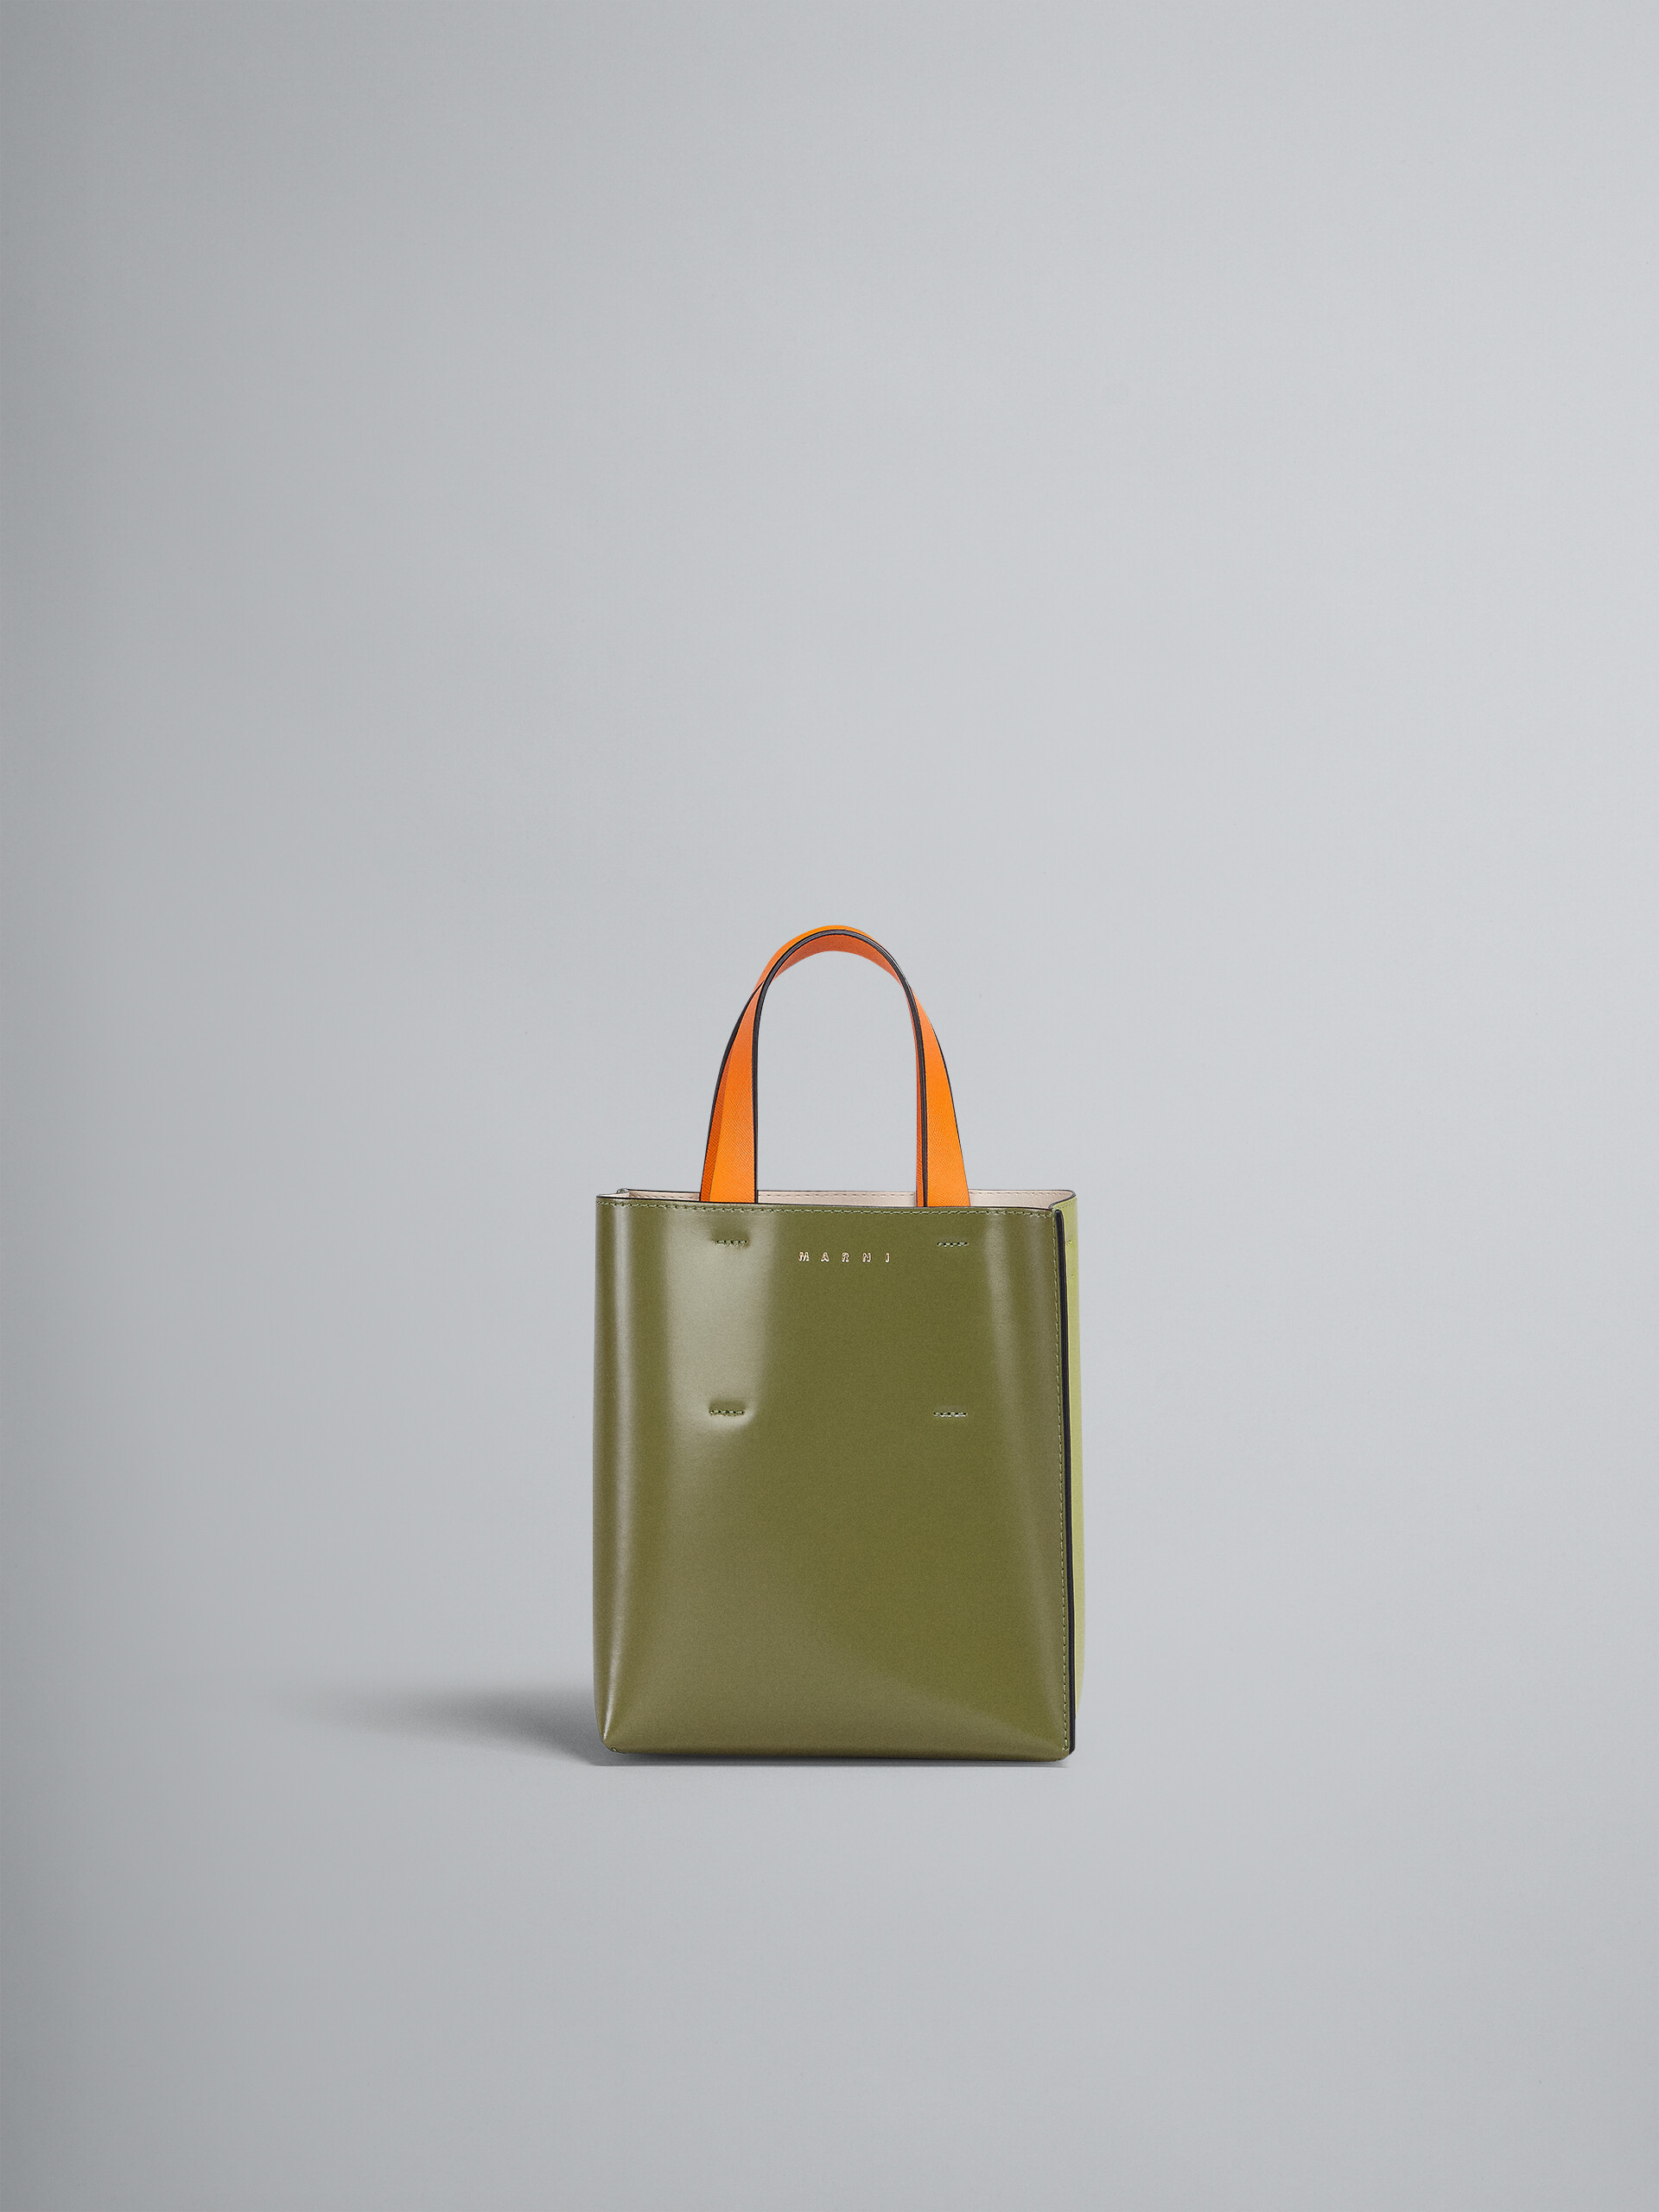 Green lime orange saffiano and polished leather MUSEO bag - Shopping Bags - Image 1